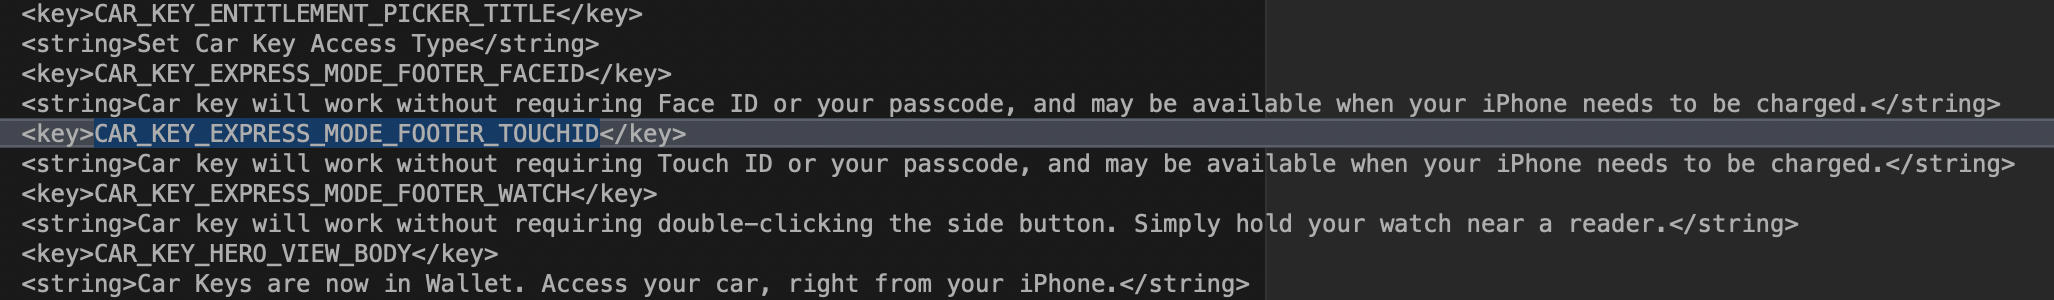 Code found in iOS 13.4.5 beta - Hidden code in latest iOS beta reveals that an exciting new feature will work with the iPhone 9